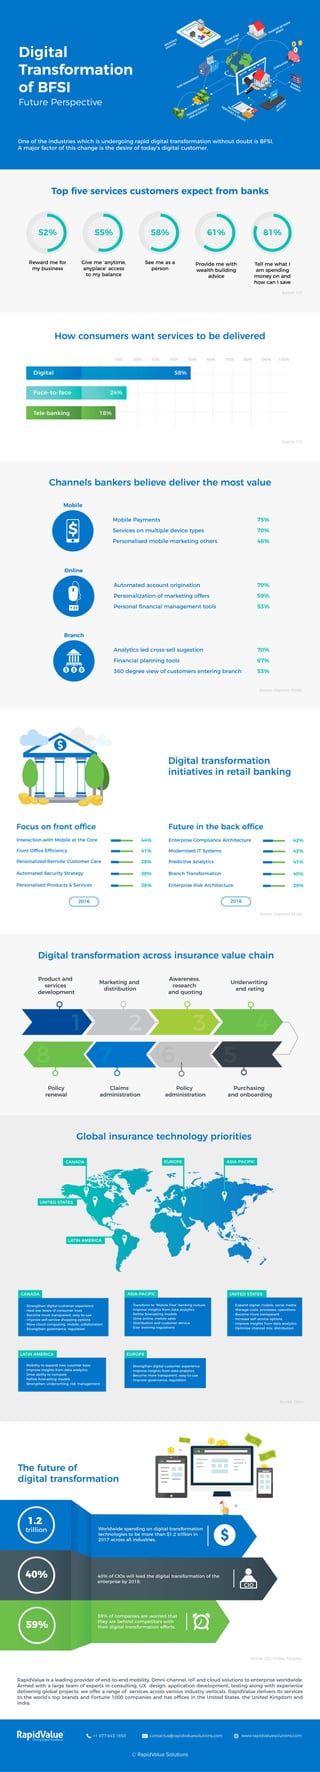 Digital Transformation for BFSI – Future Perspective | An Infographic by RapidValue